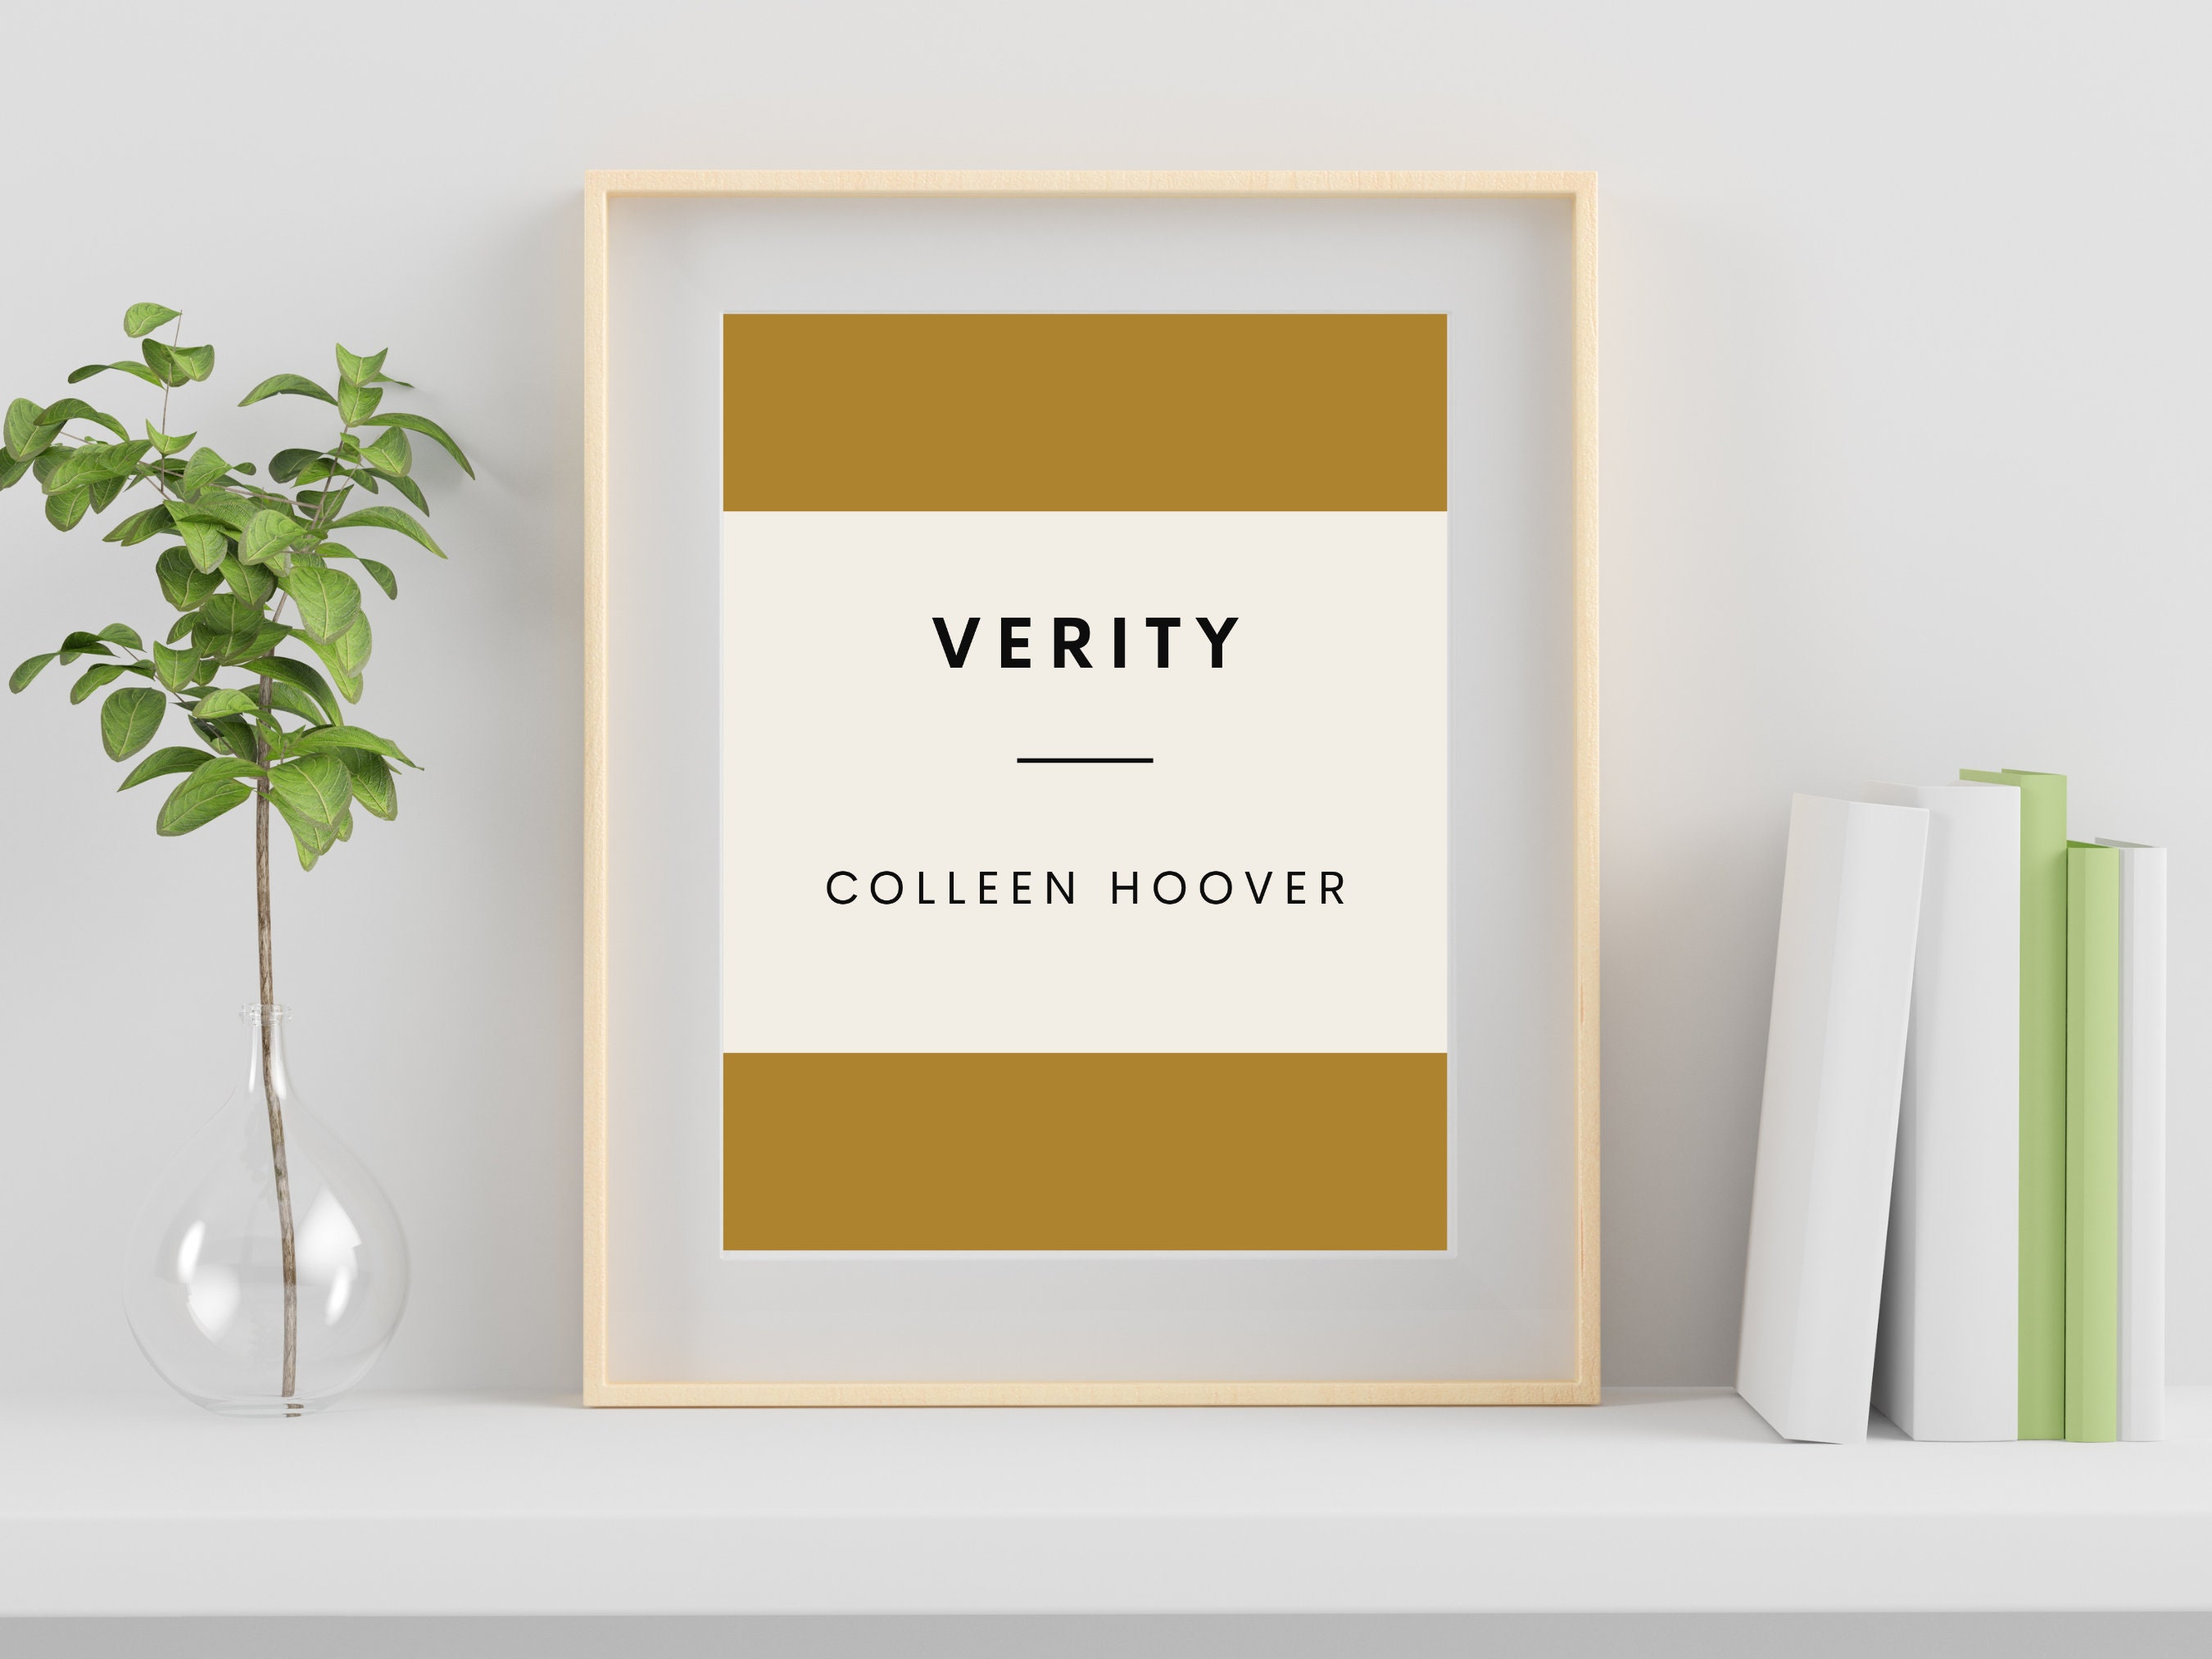 Verity - Colleen Hoover Poster for Sale by Singinglover